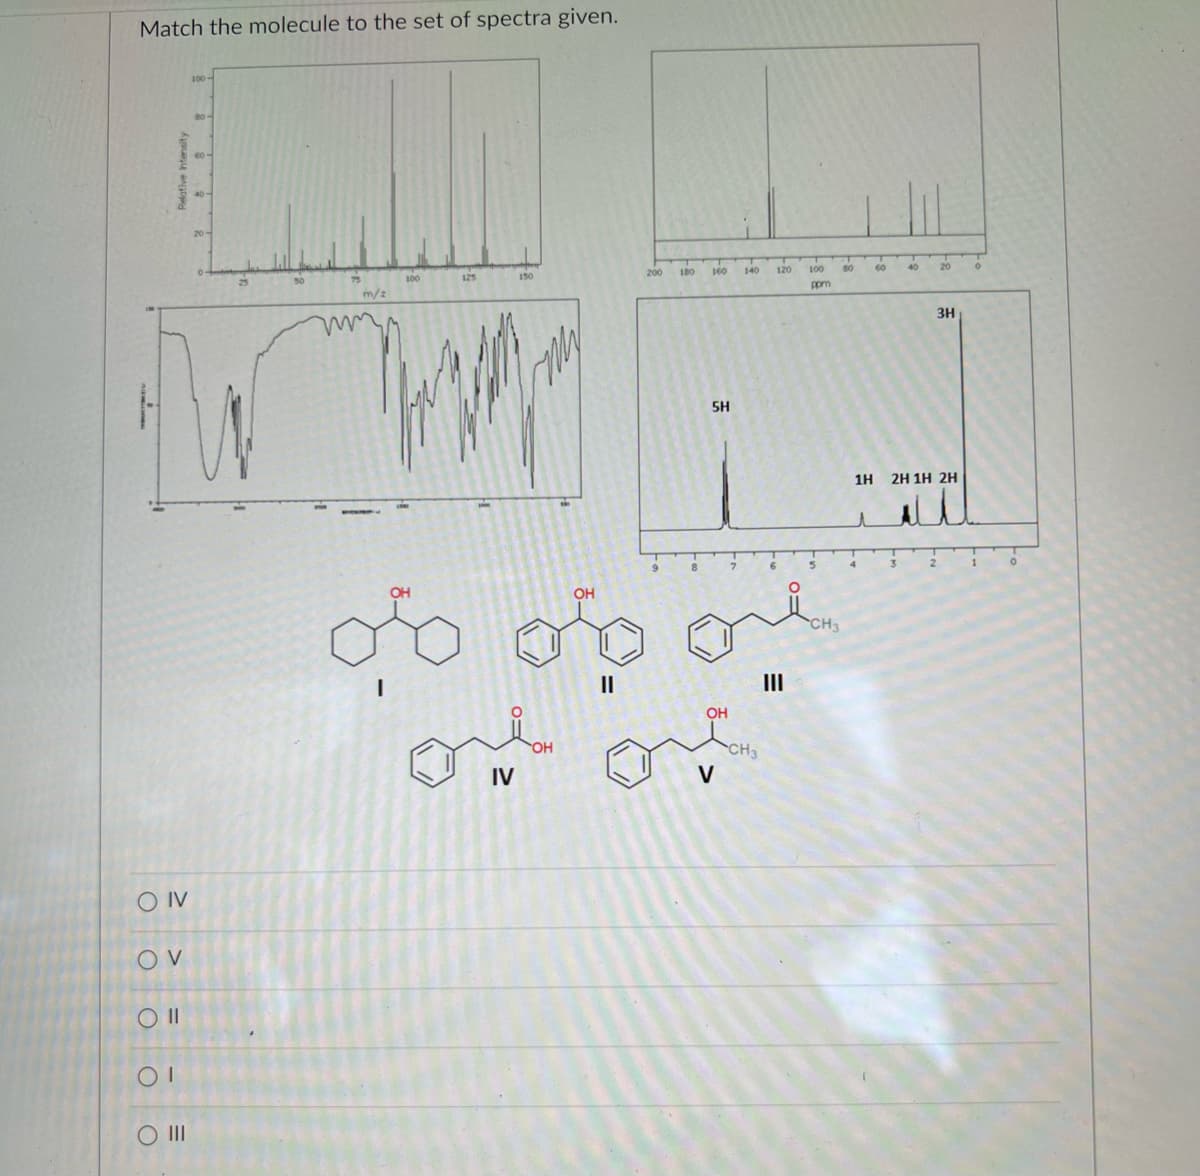 Match the molecule to the set of spectra given.
100-
100
125
200
180
160
140
120
100
80
60
40
20
m/z
ppm
3H
5H
1H 2H 1H 2H
ll
fo op o
2.
он
II
II
OH
OH
CH3
V
IV
O IV
O V
O II
Relative Intensity
